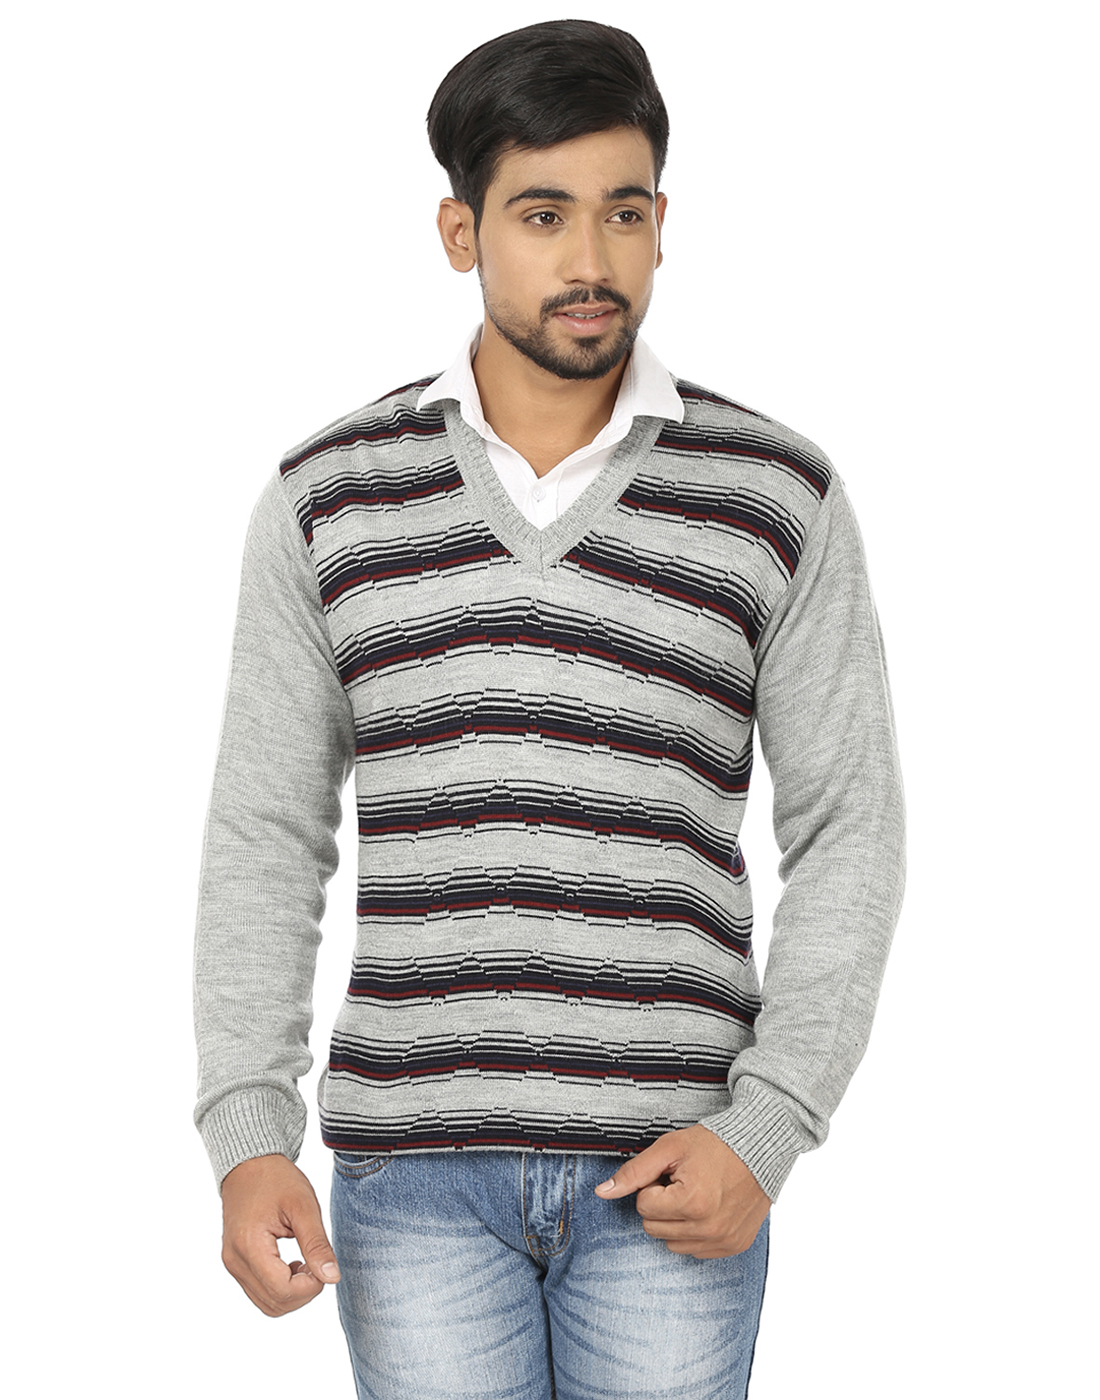 Buy Spawn Sweaters for Men's Online @ ₹799 from ShopClues